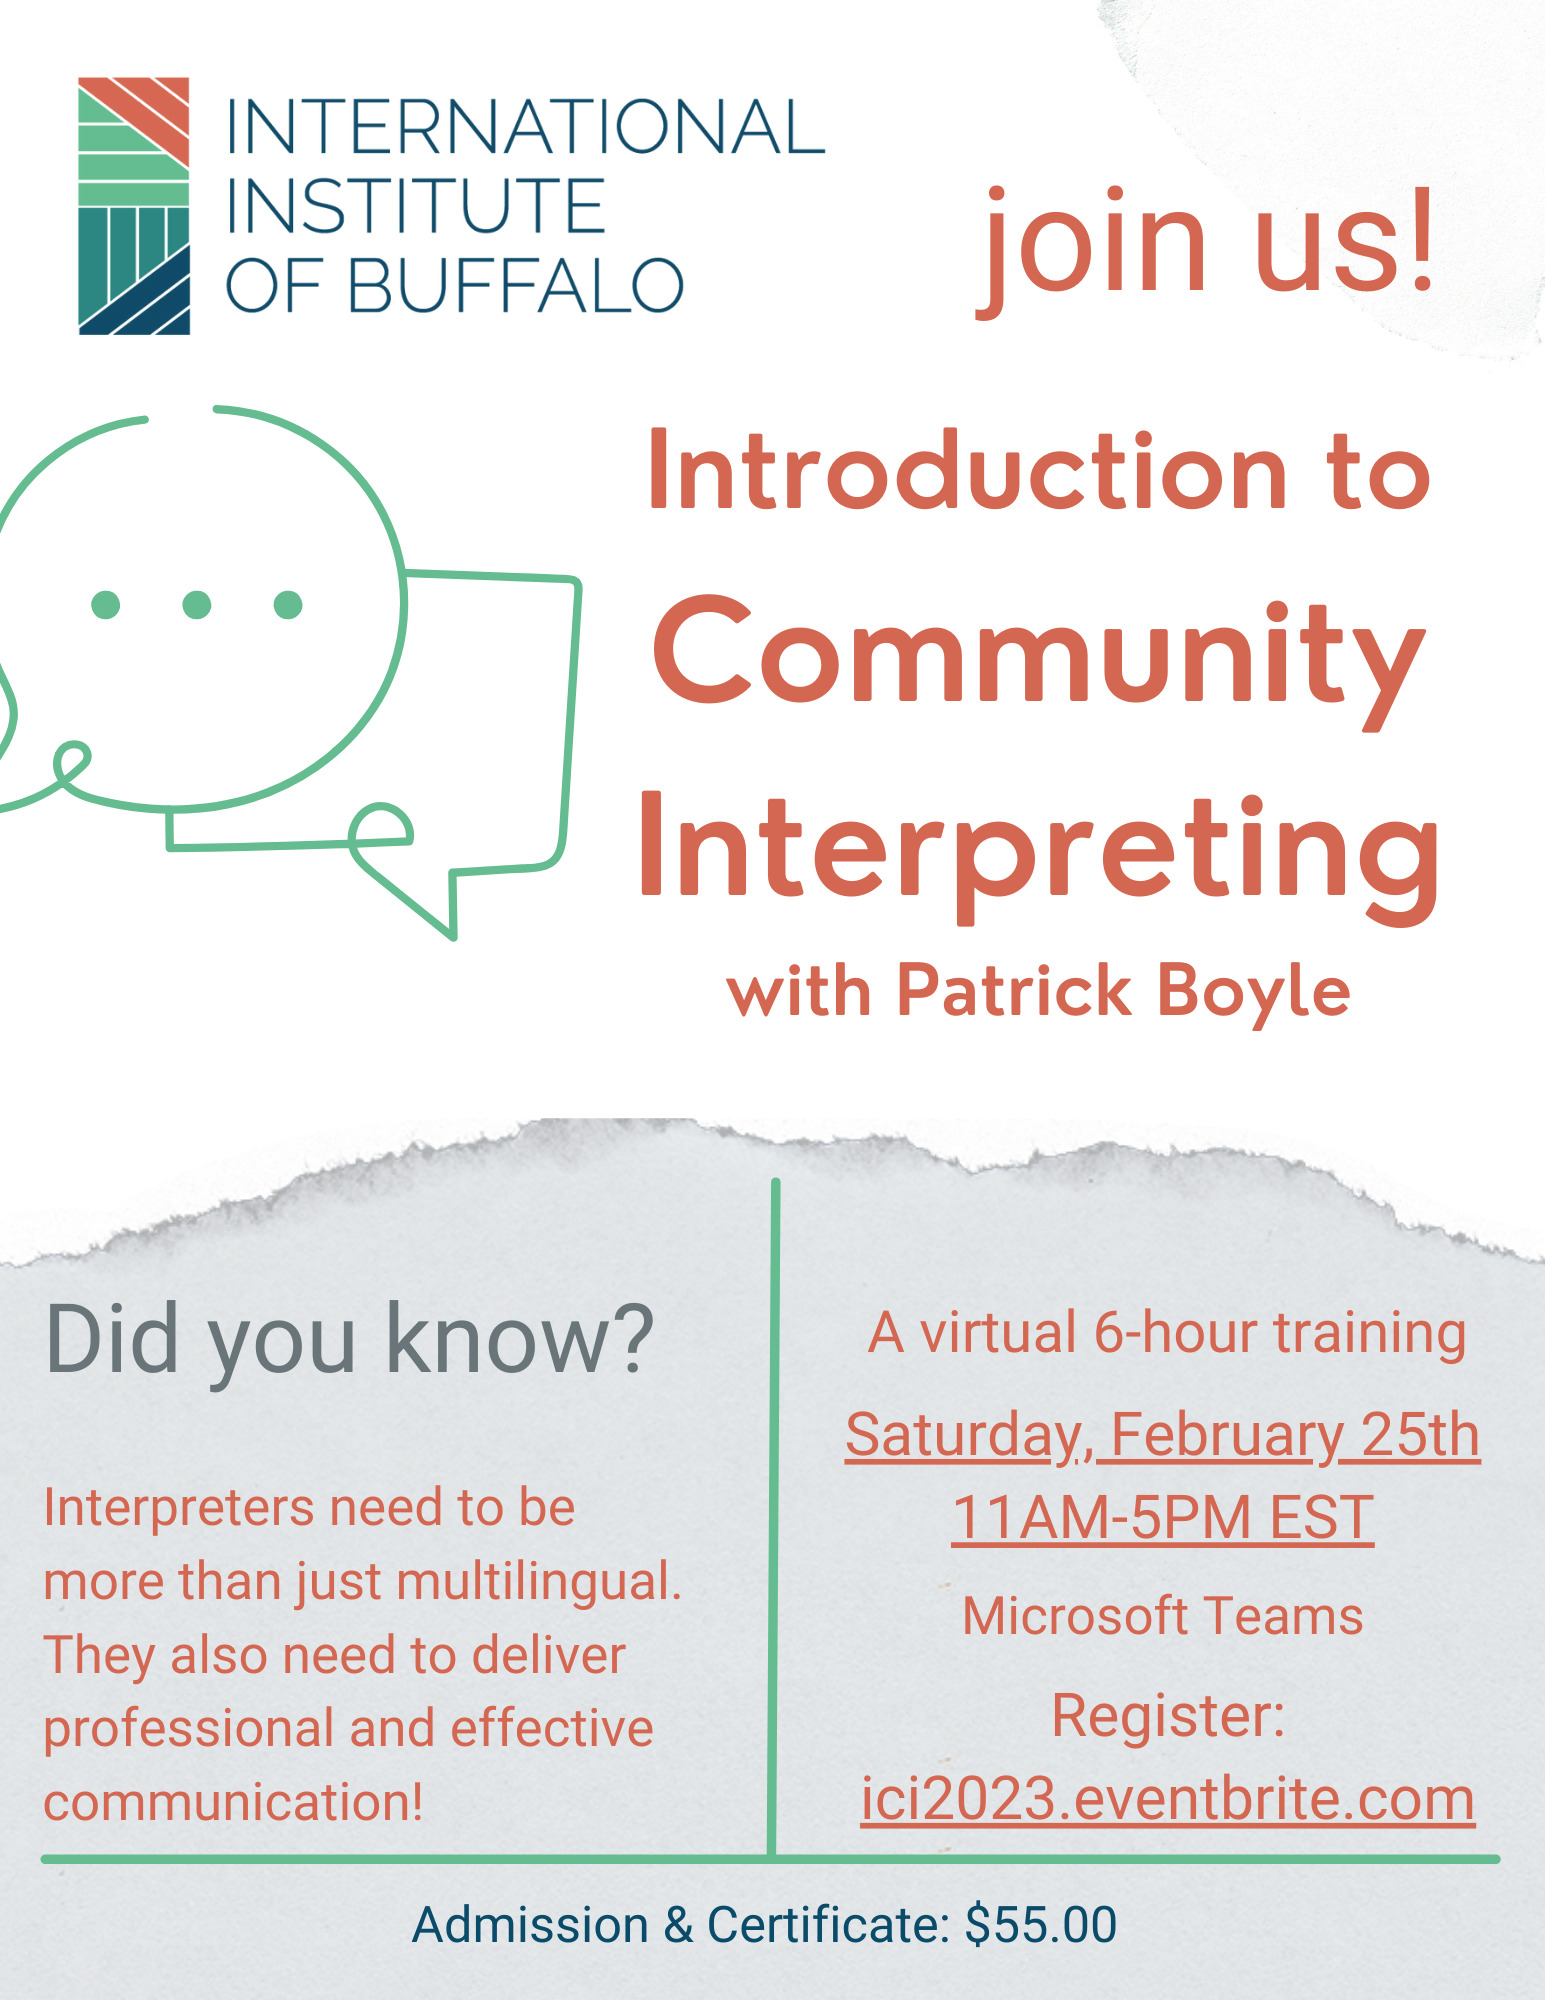 Join Us! Introduction to Community Interpreting Saturday, February 25